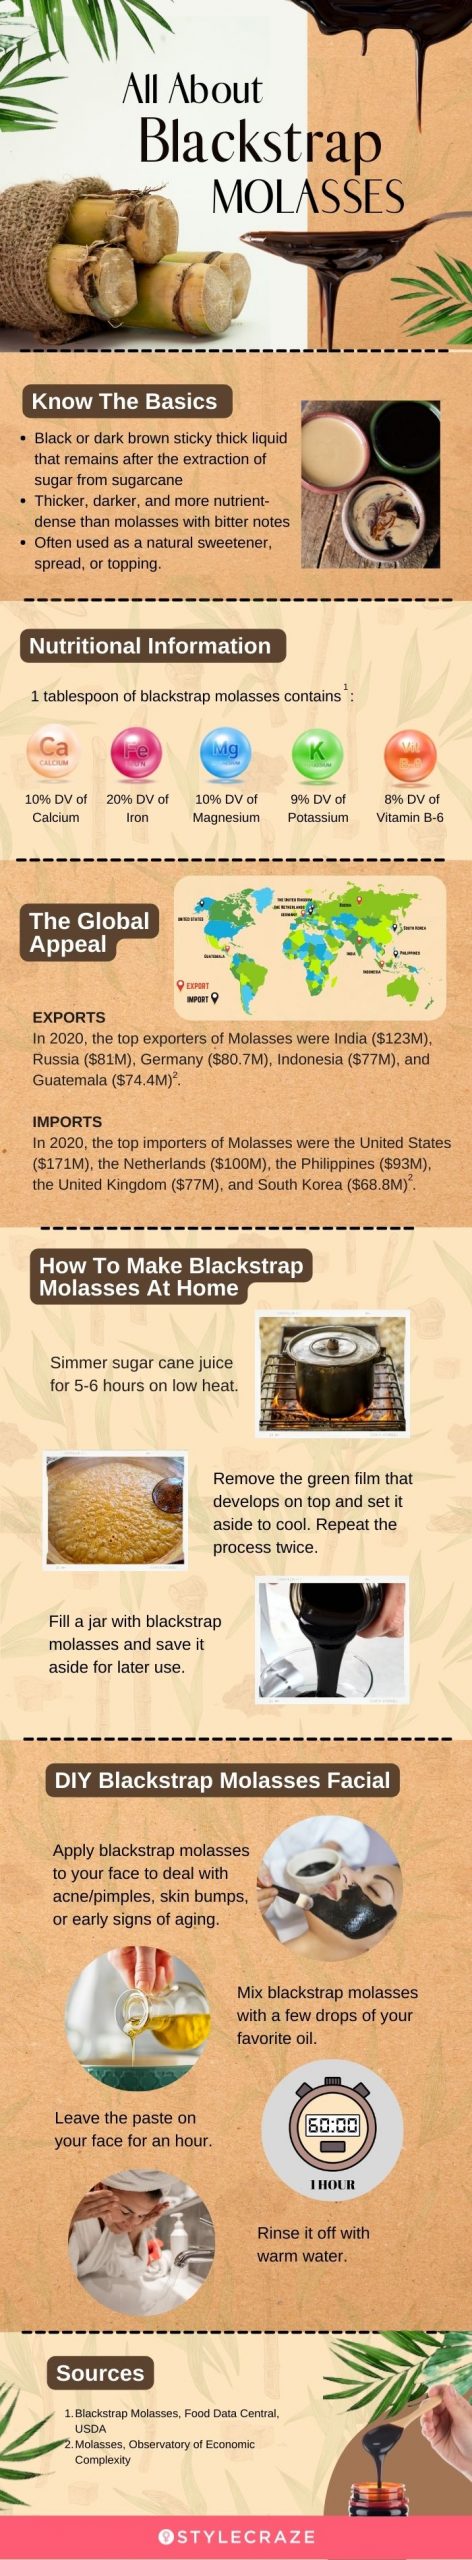 all about blackstrap molasses (infographic)